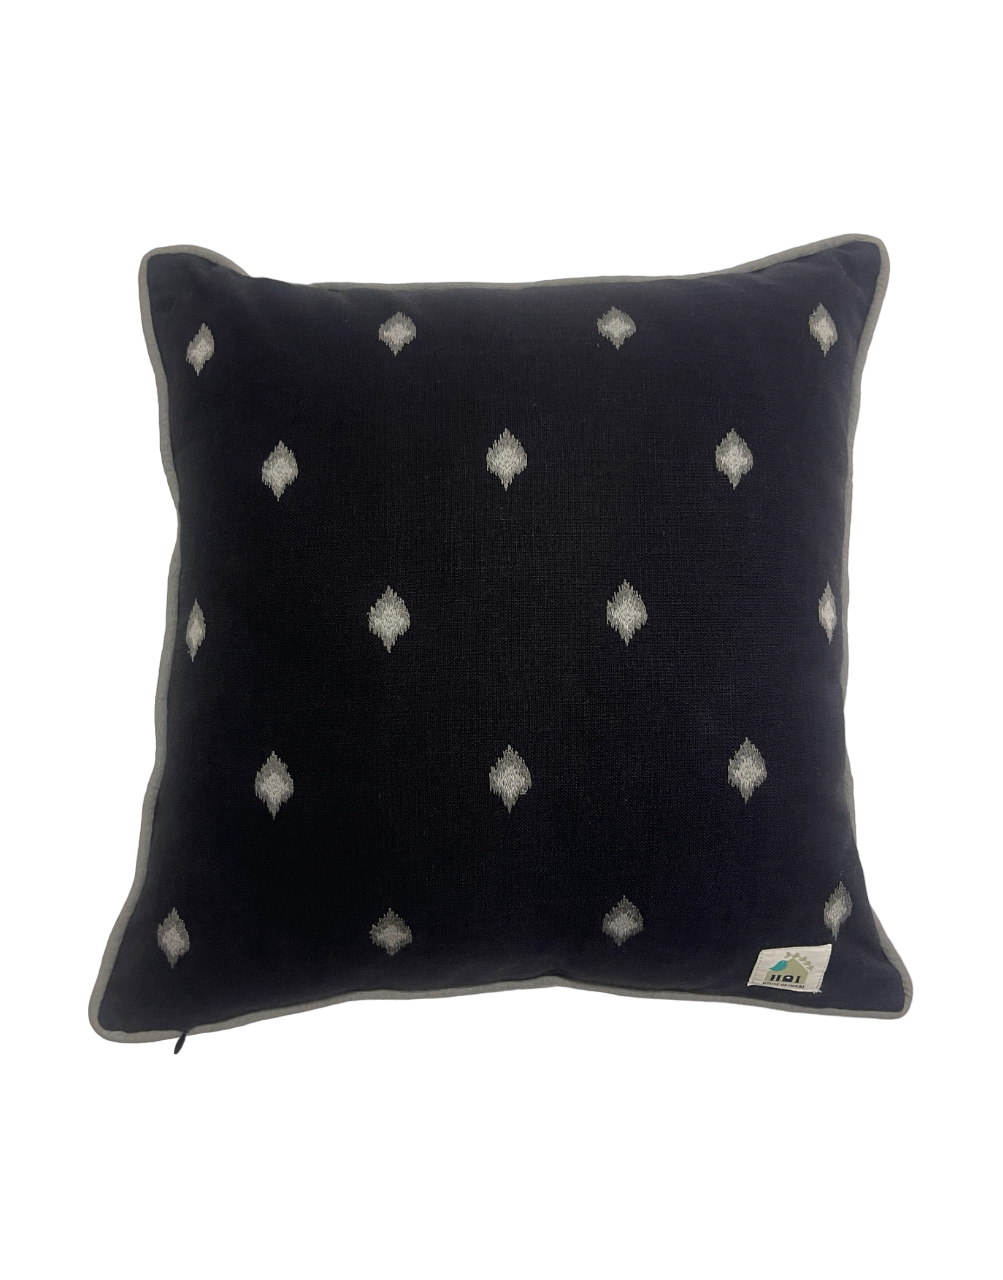 Patan Ikat Embroidered Black Double Sided Cushion Cover